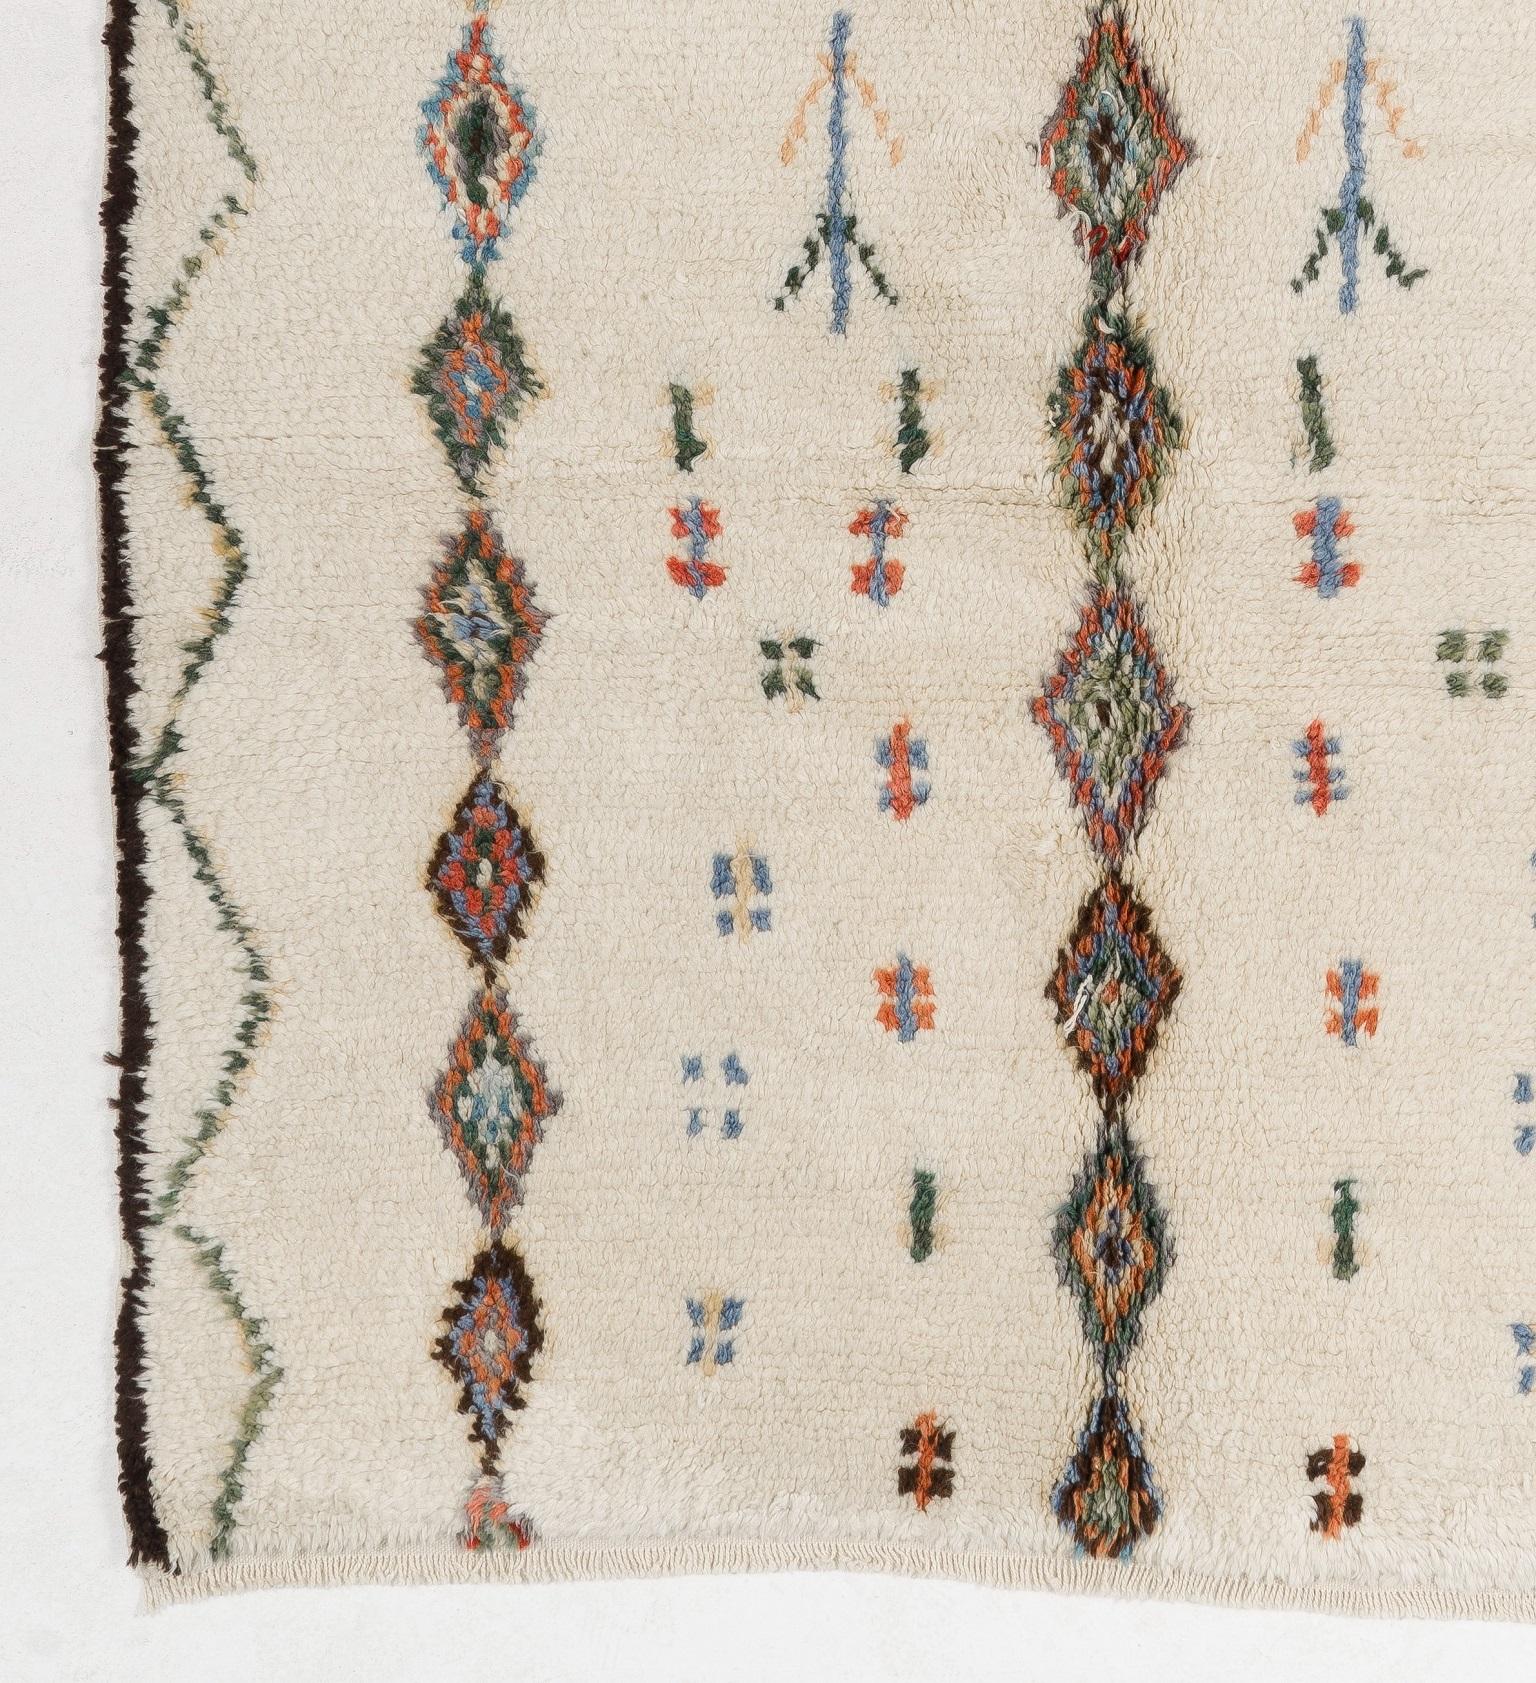 A contemporary hand knotted Moroccan rug made of natural un-dyed sheep's wool with three columns of delicately drawn linked-diamonds and free-floating comb and fishbone motifs in between the columns in dark green, light blue, salmon pink, salmon